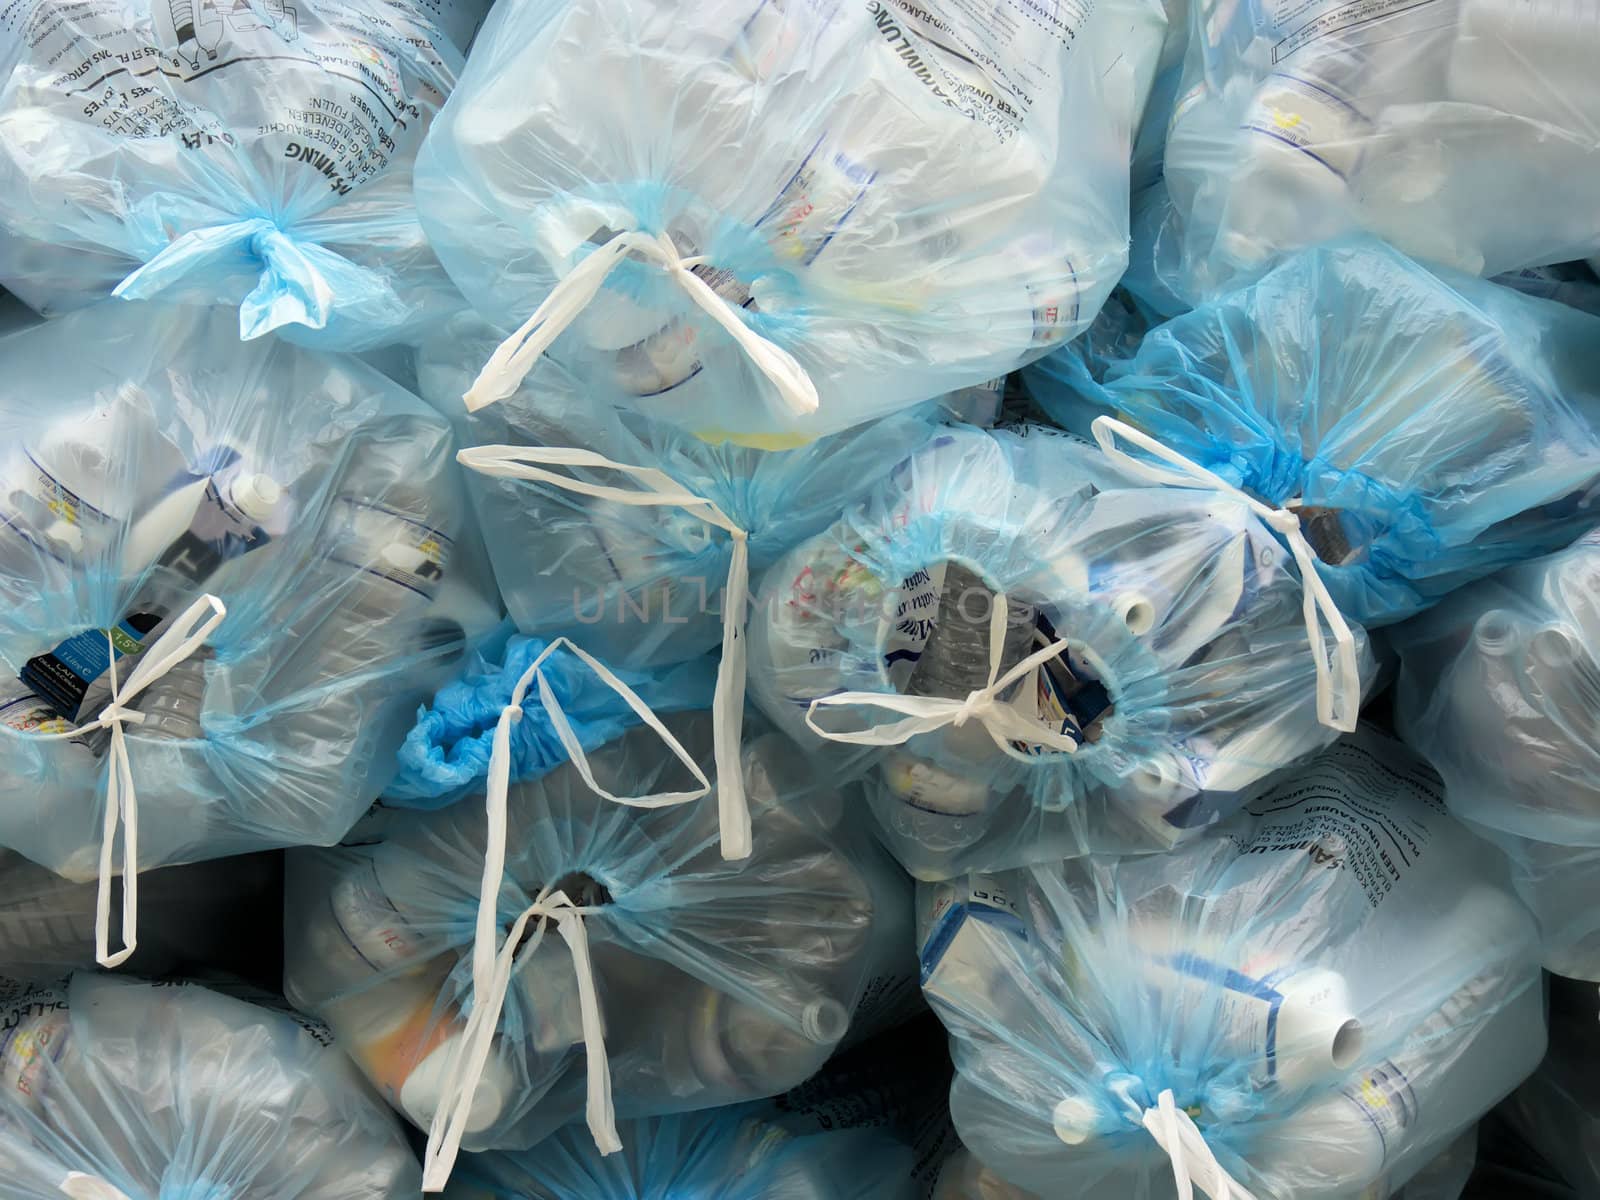 the garbage bags and wastes